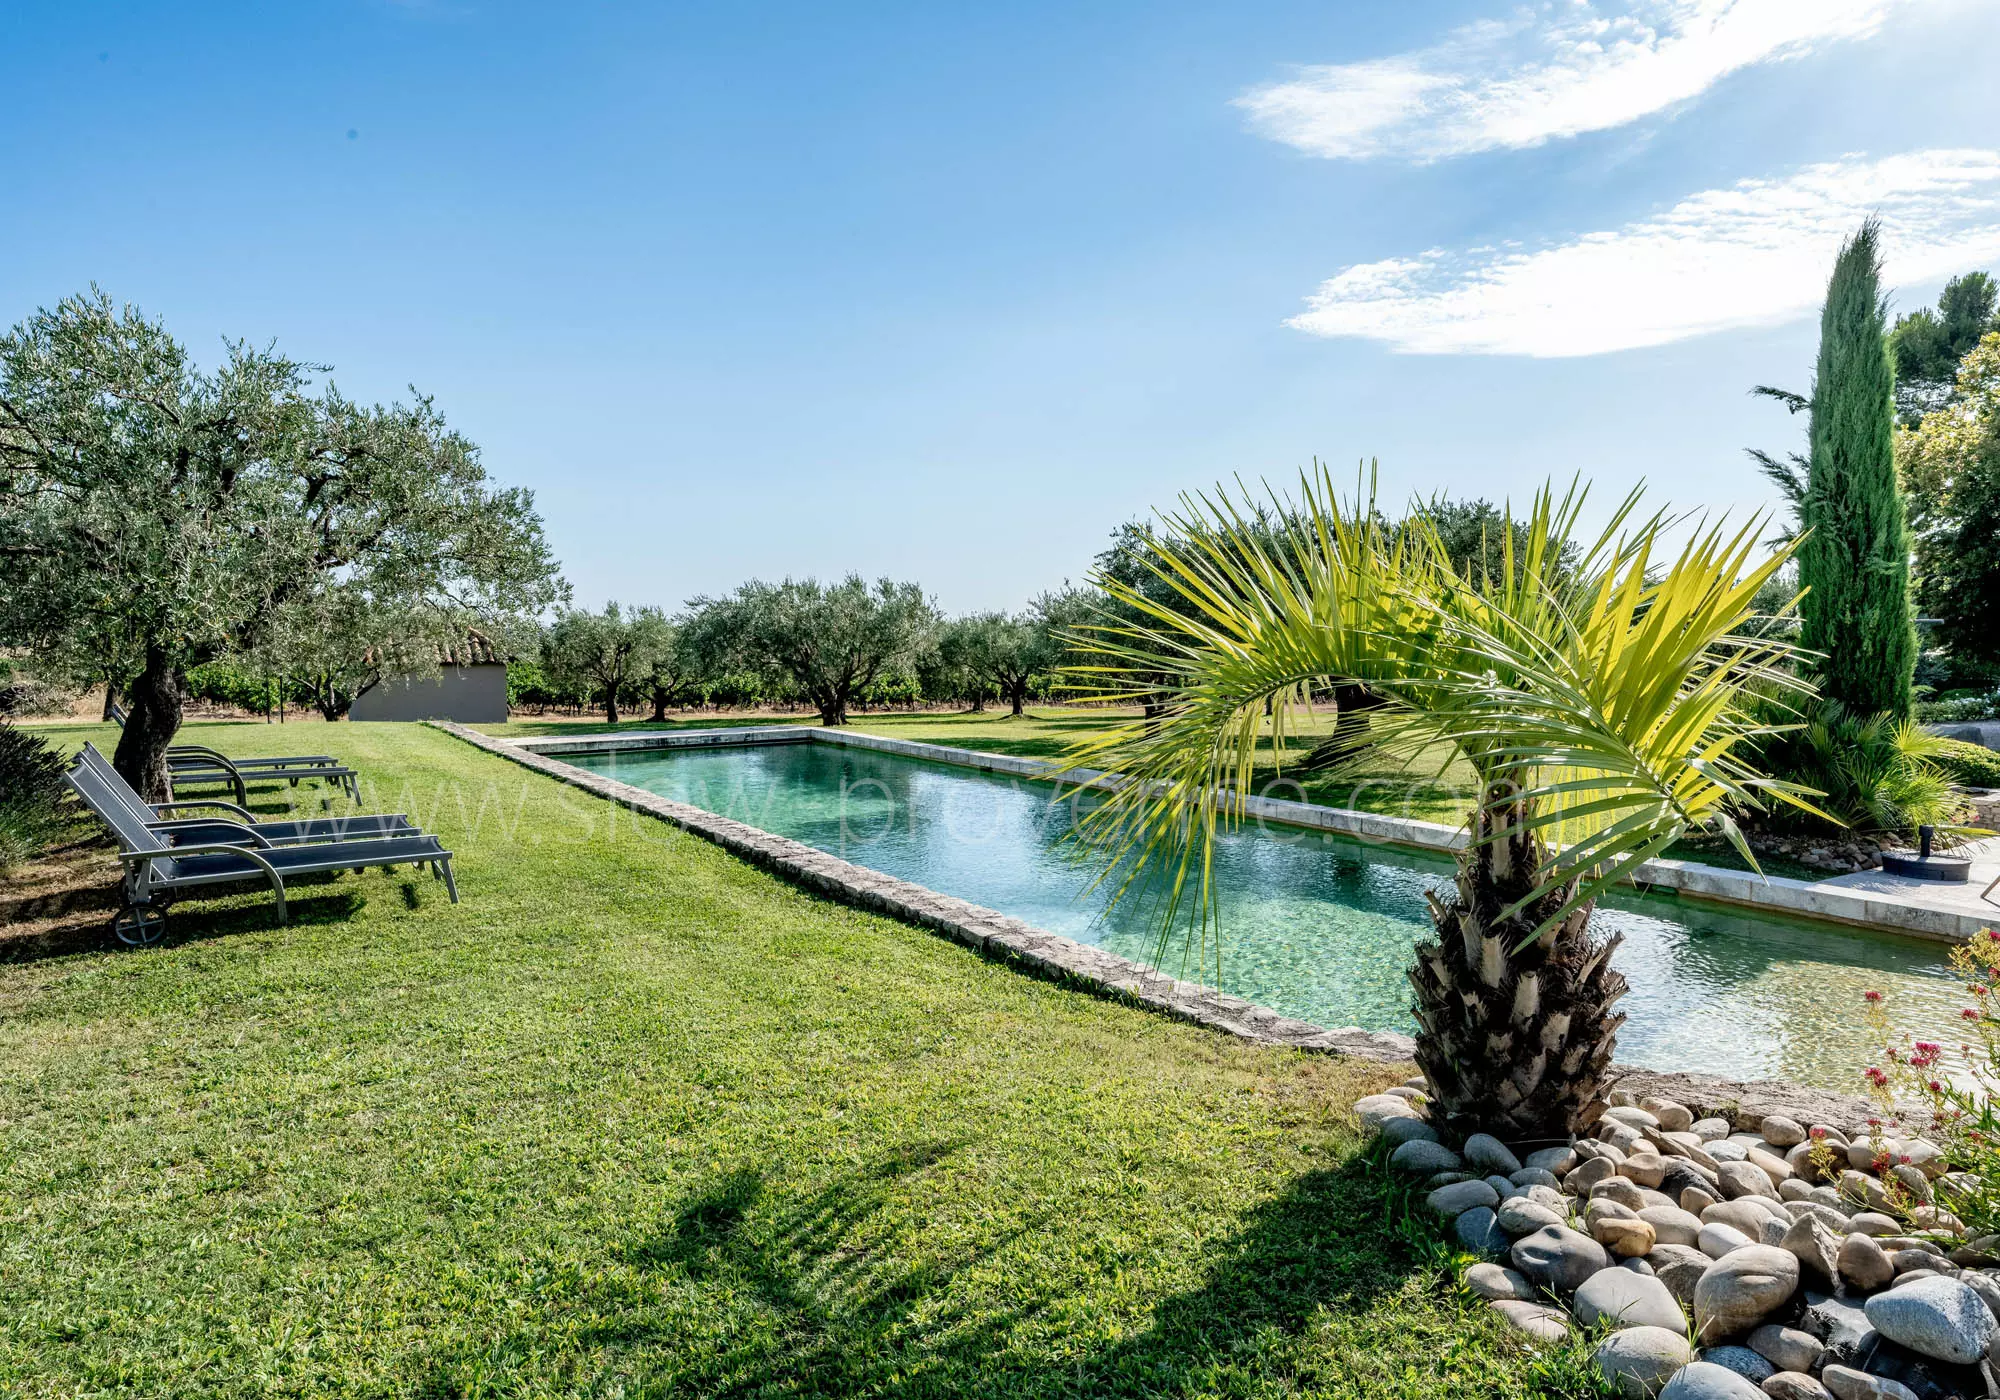 The pool is surrounded with olive trees and lavender